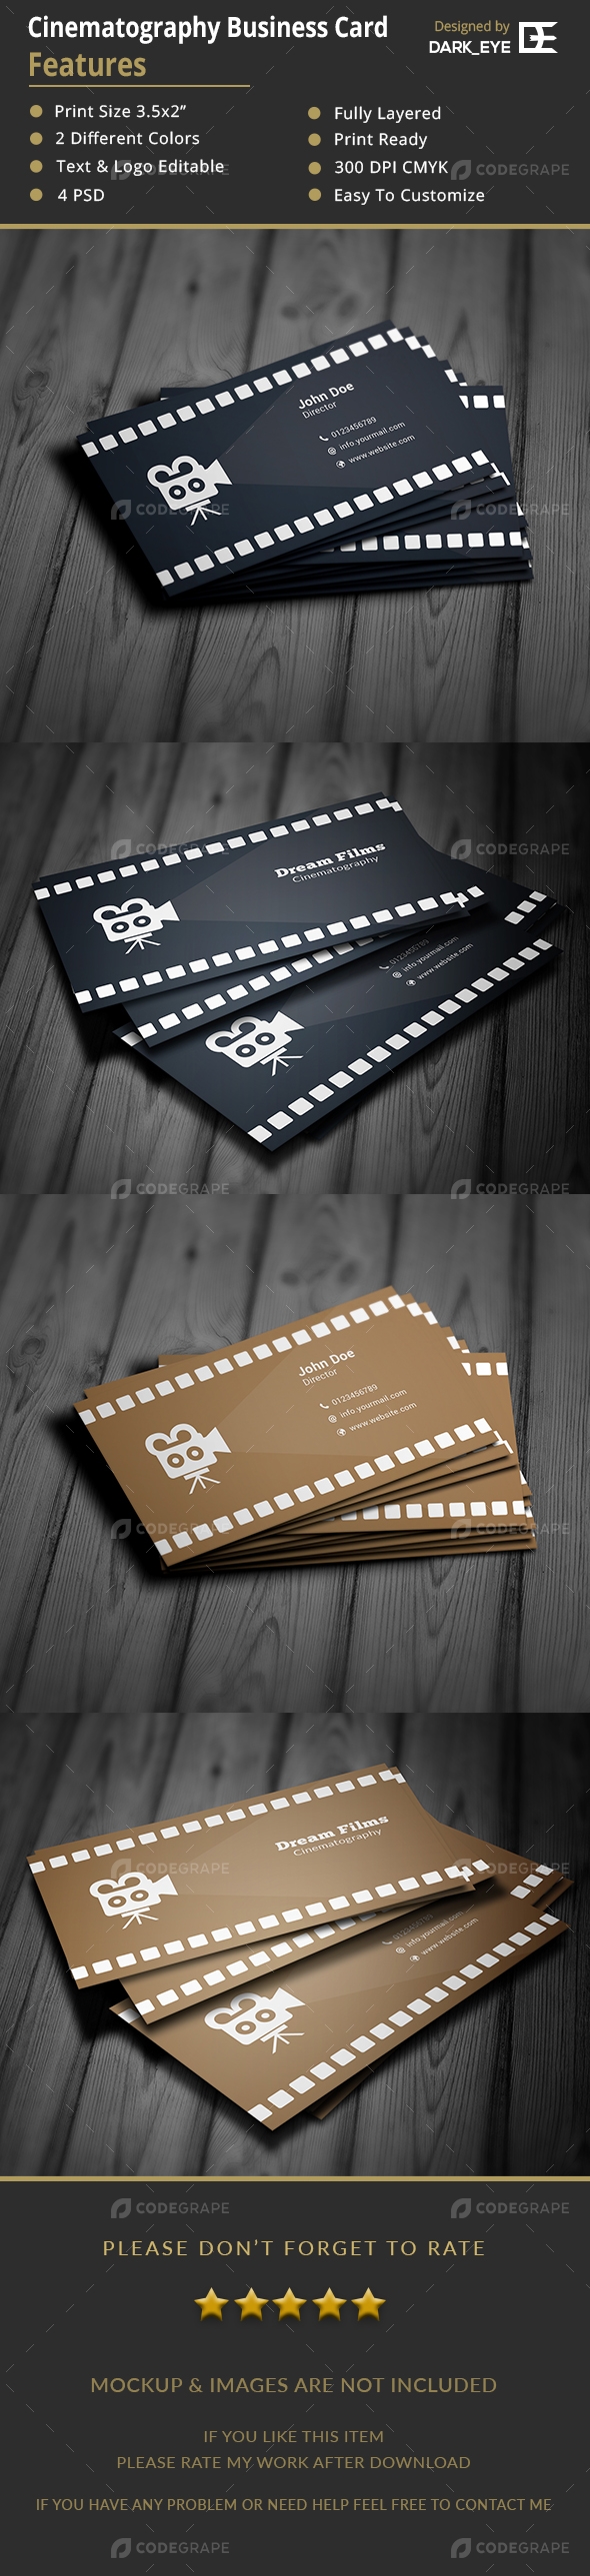 Cinematography Business Card